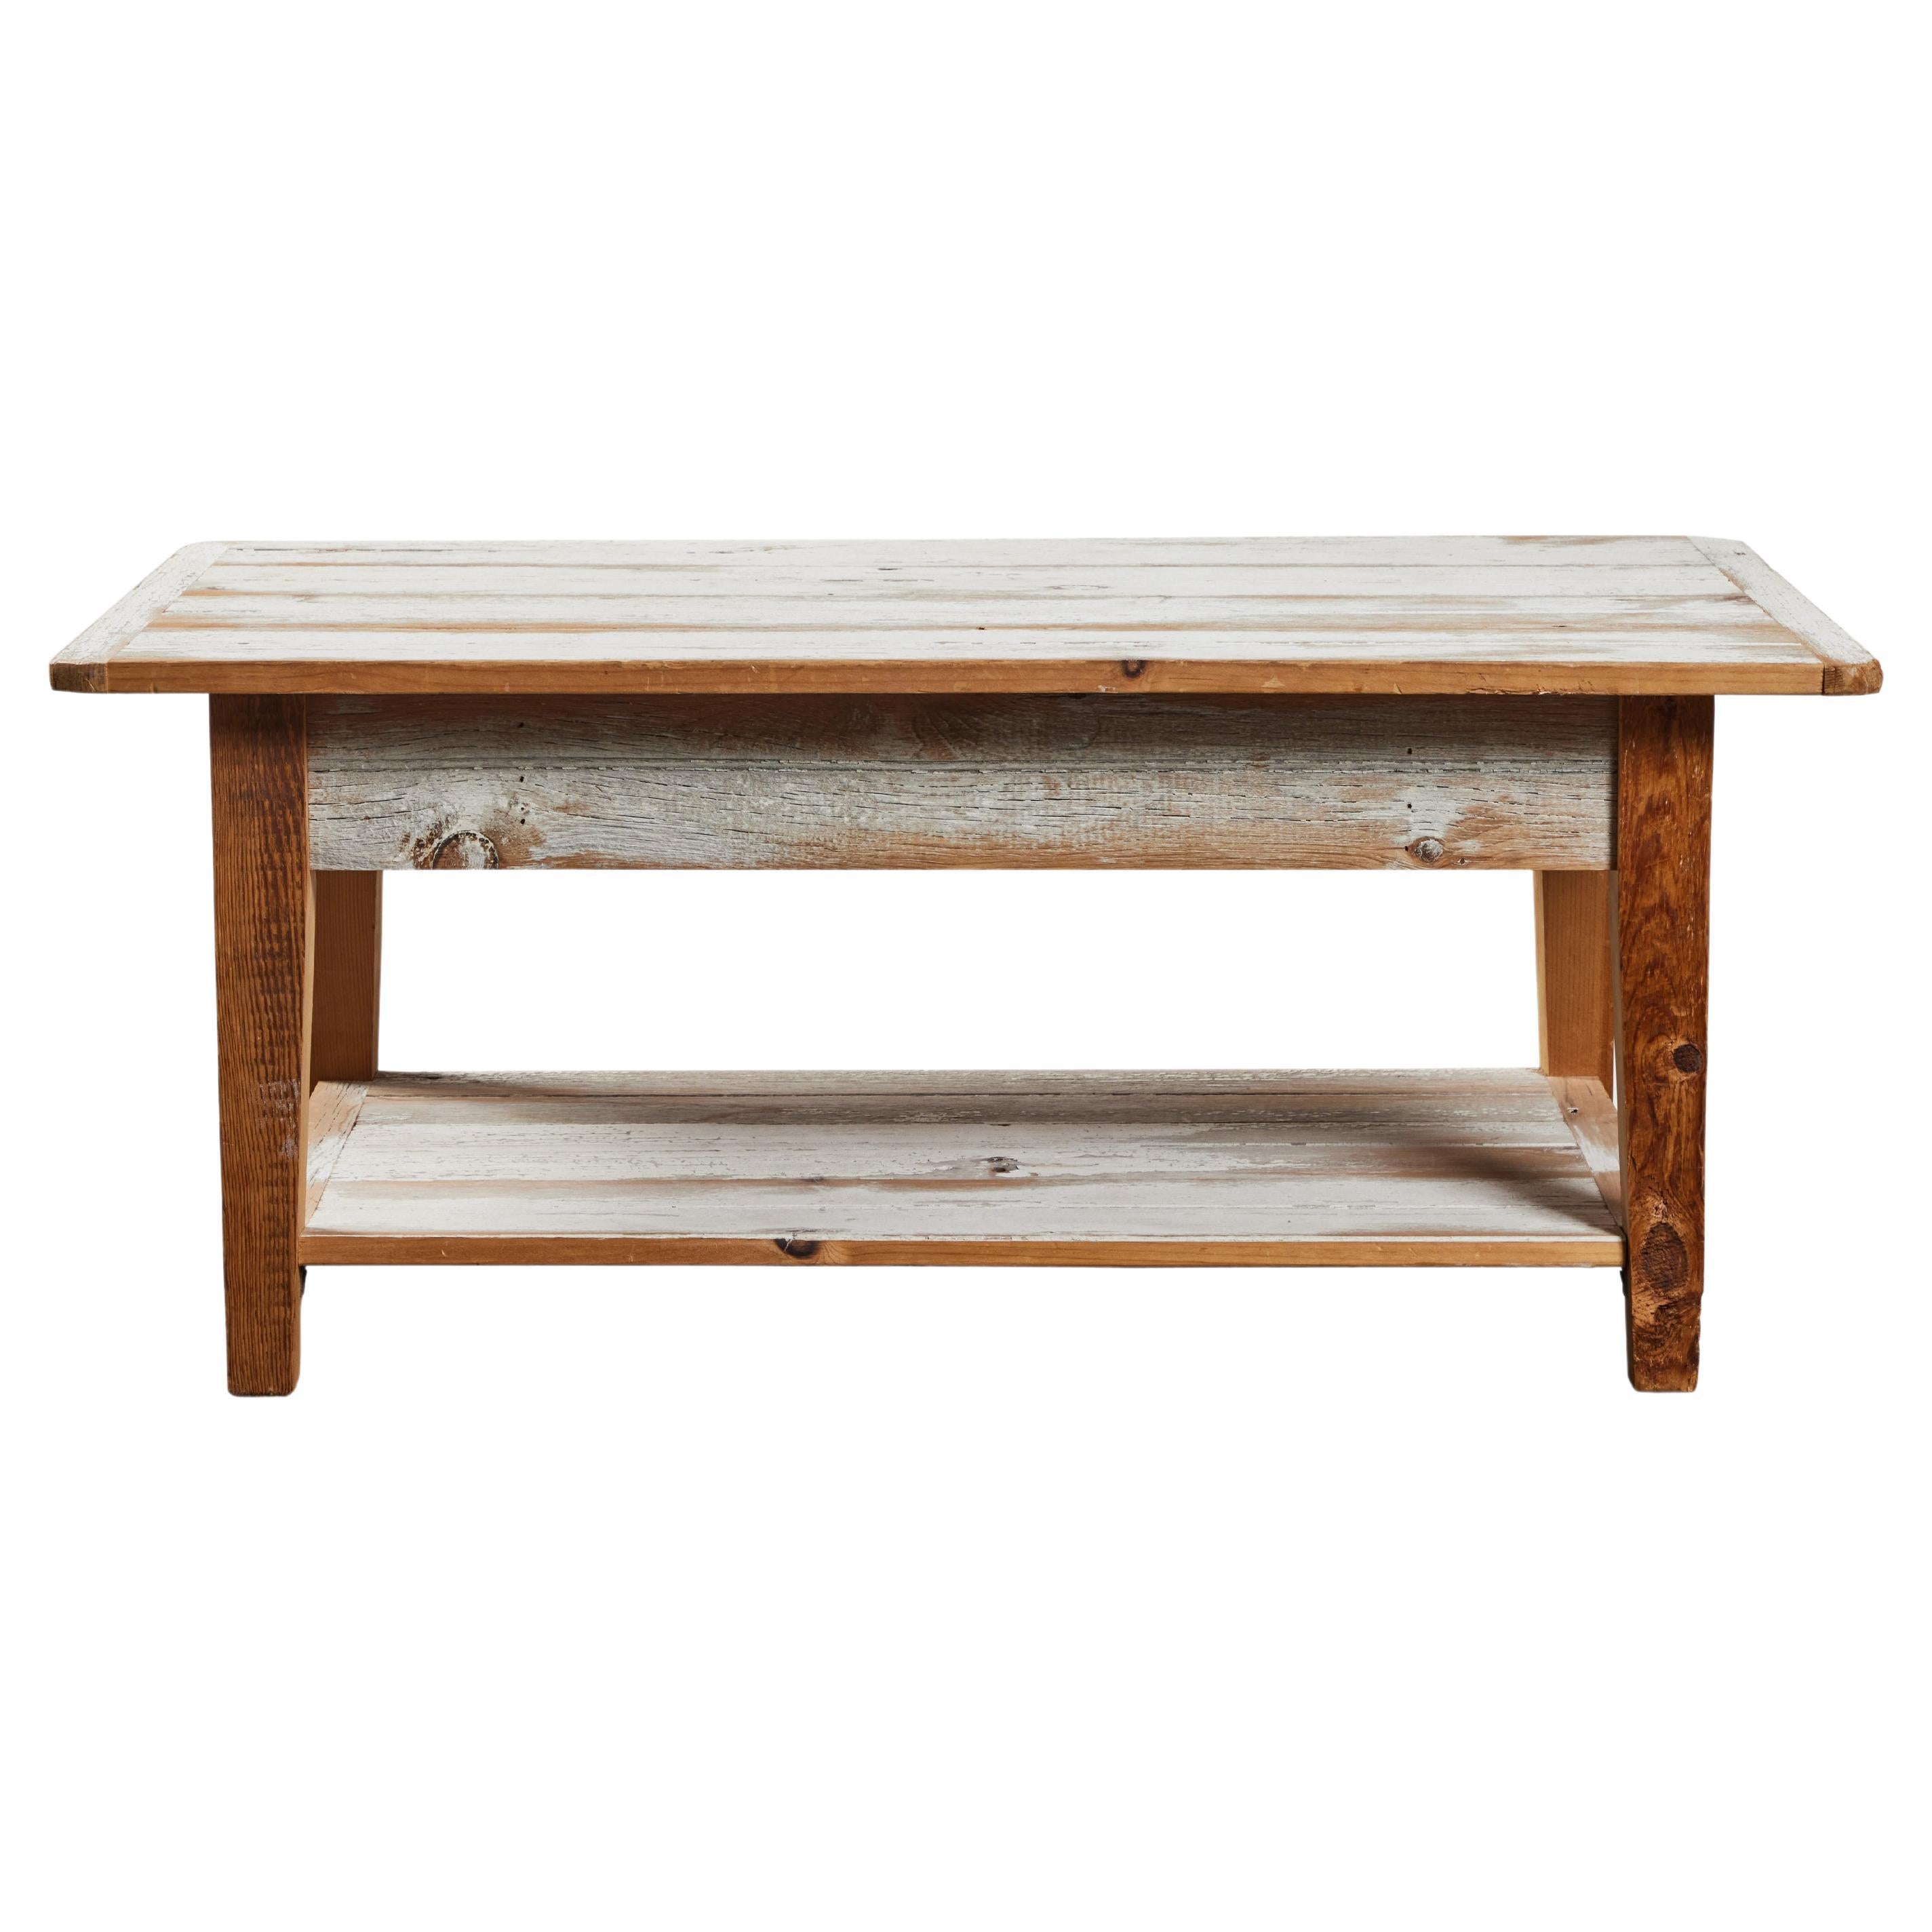 Distressed-Painted White Oak Coffee Table 